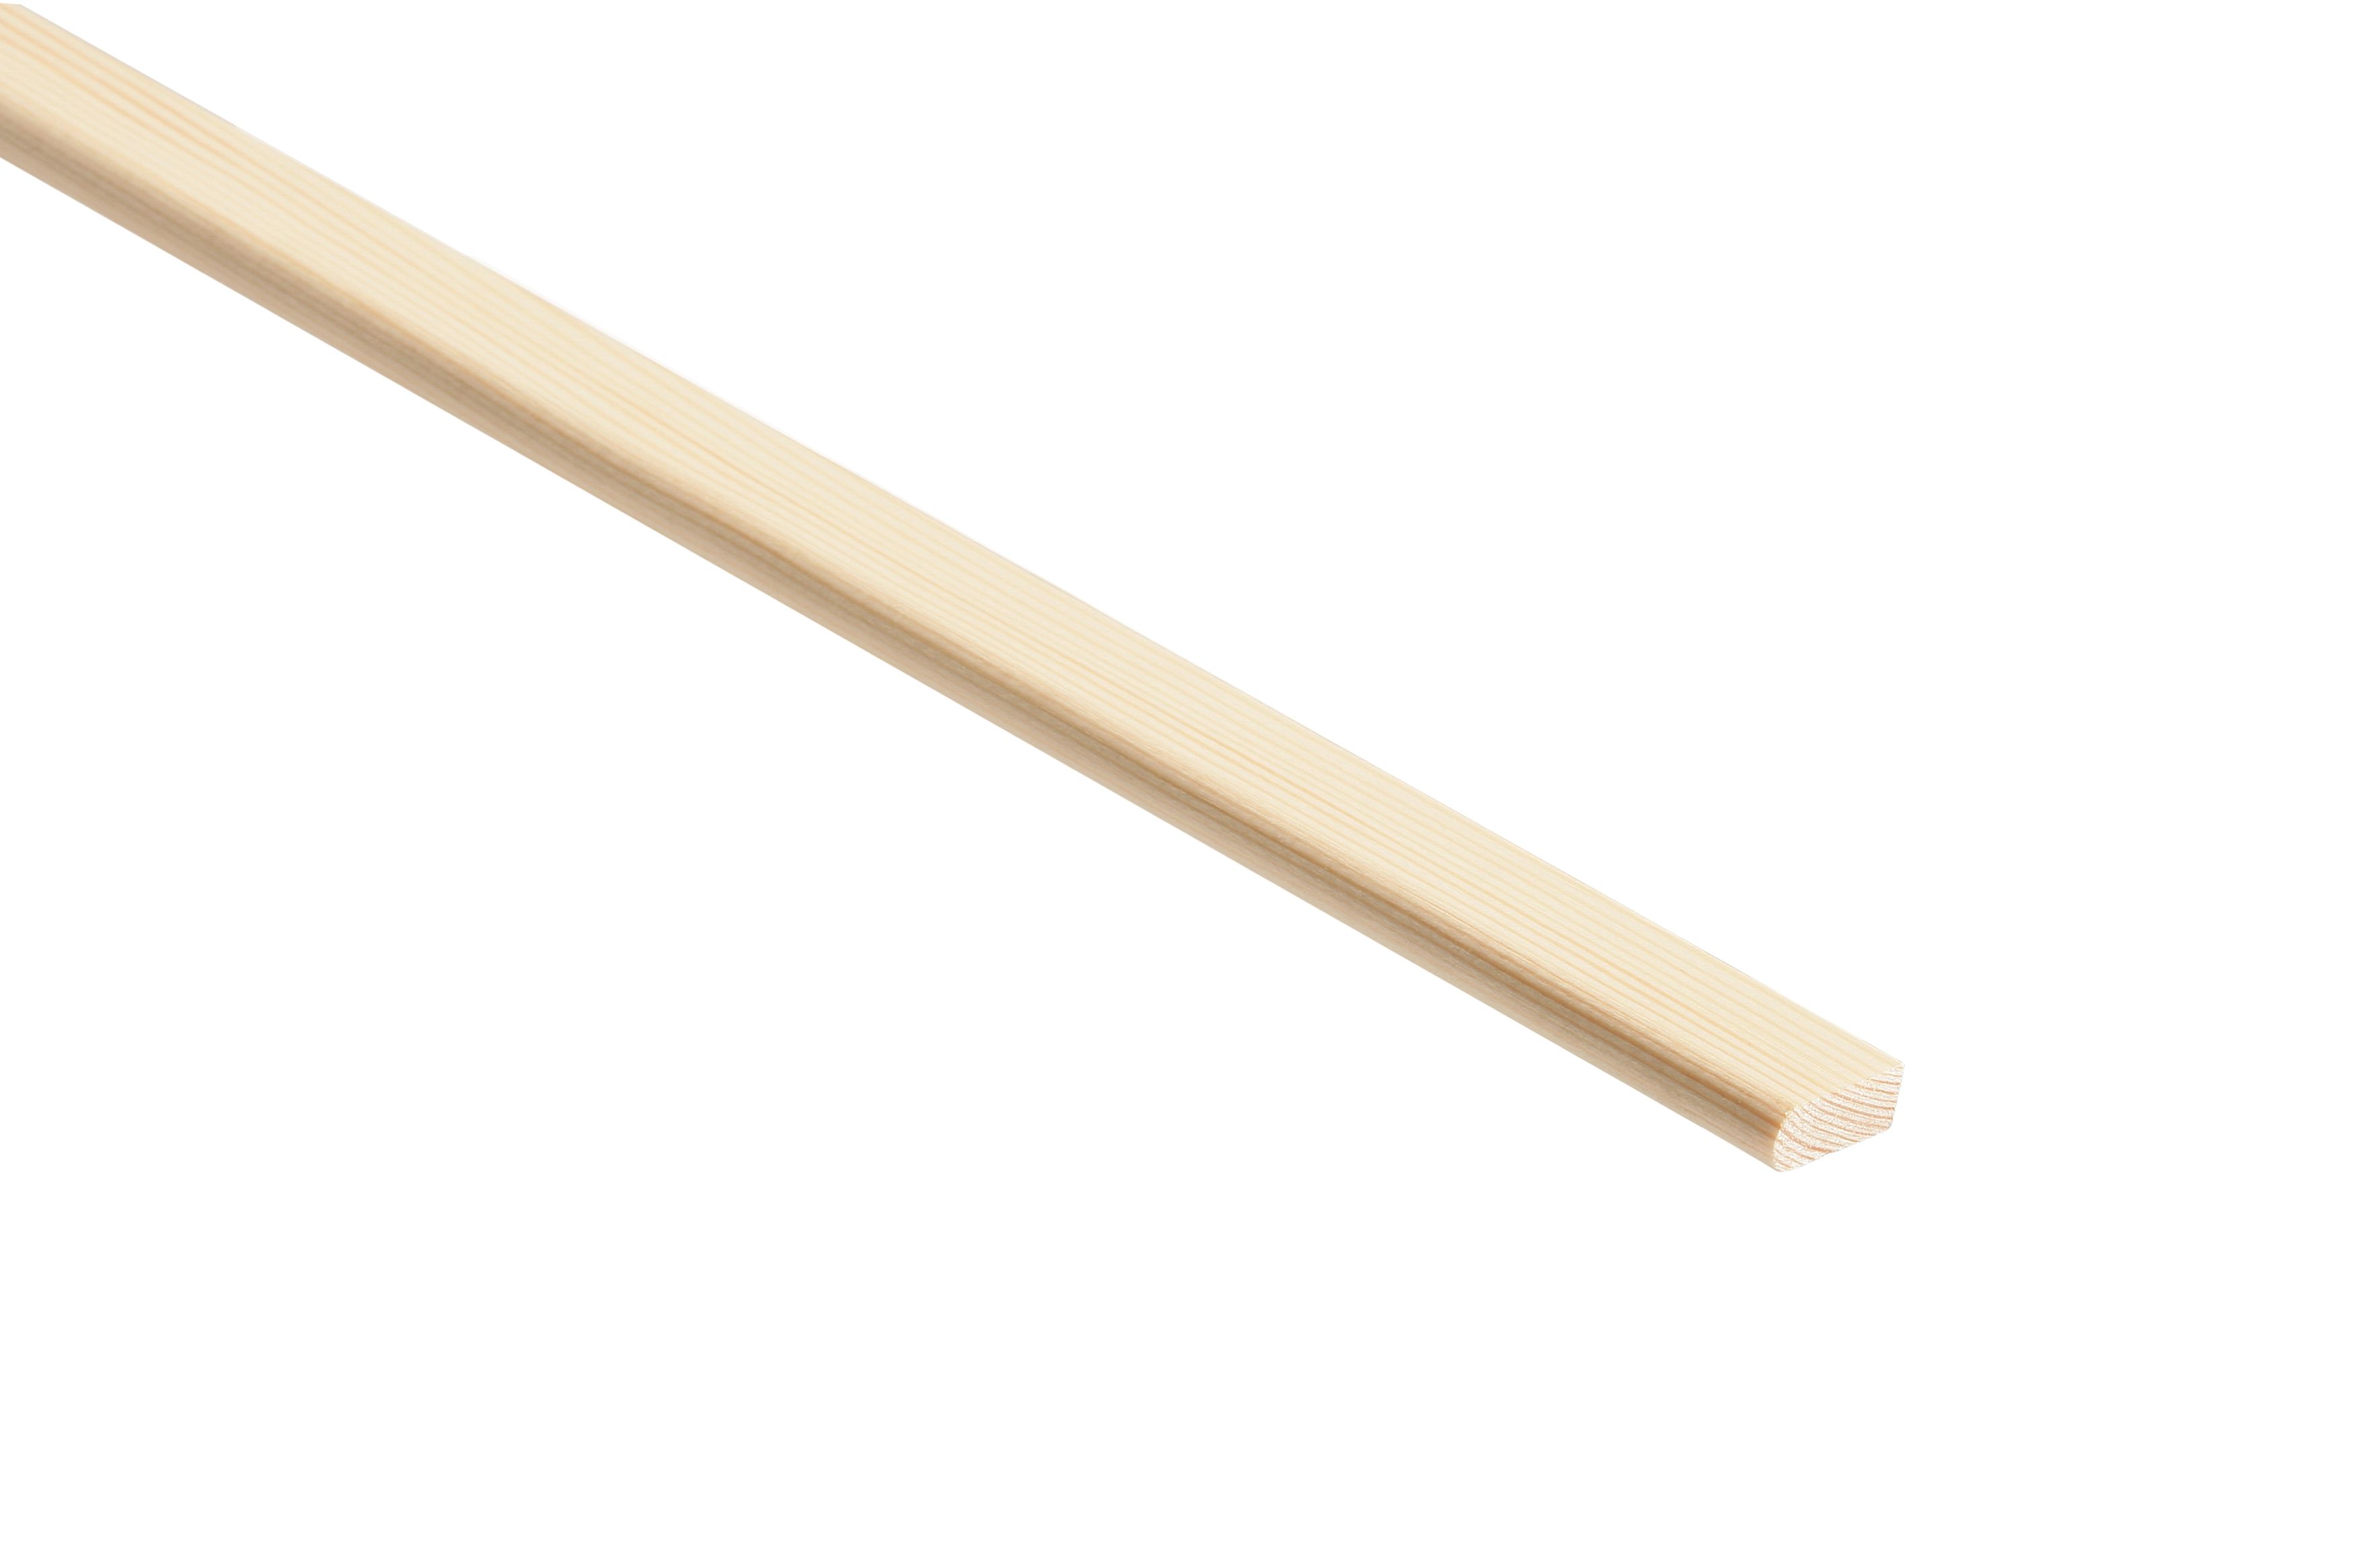 Image of Wickes Pine Parting Bead Moulding - 20 x 8 x 2400mm